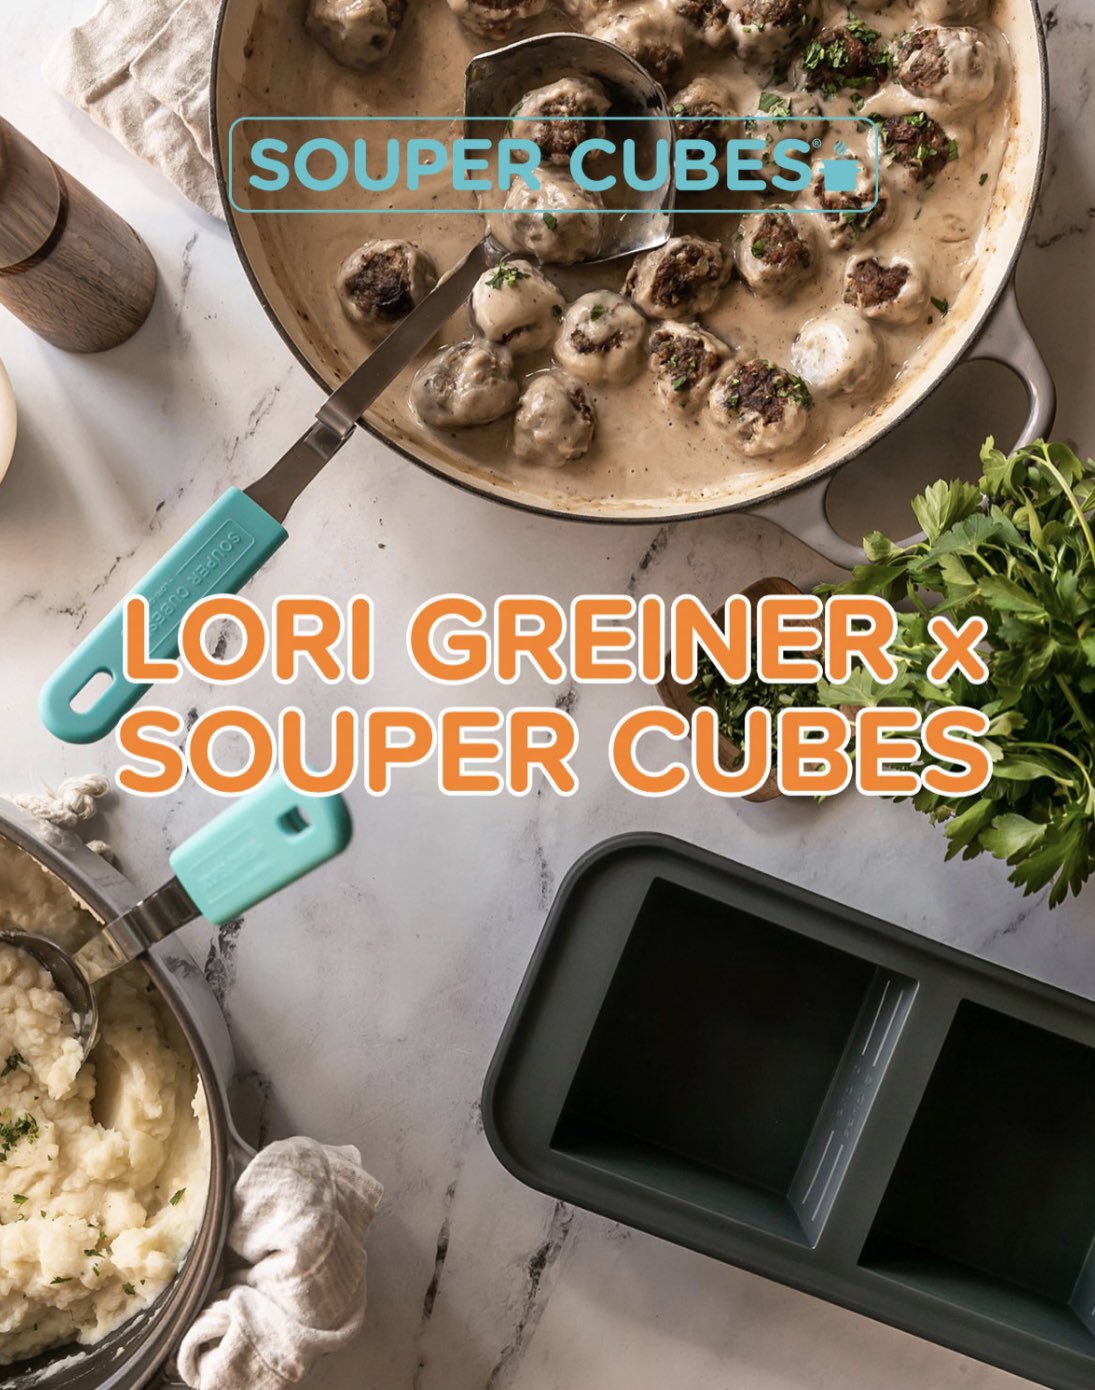 Where Is Souper Cubes From Shark Tank Today?